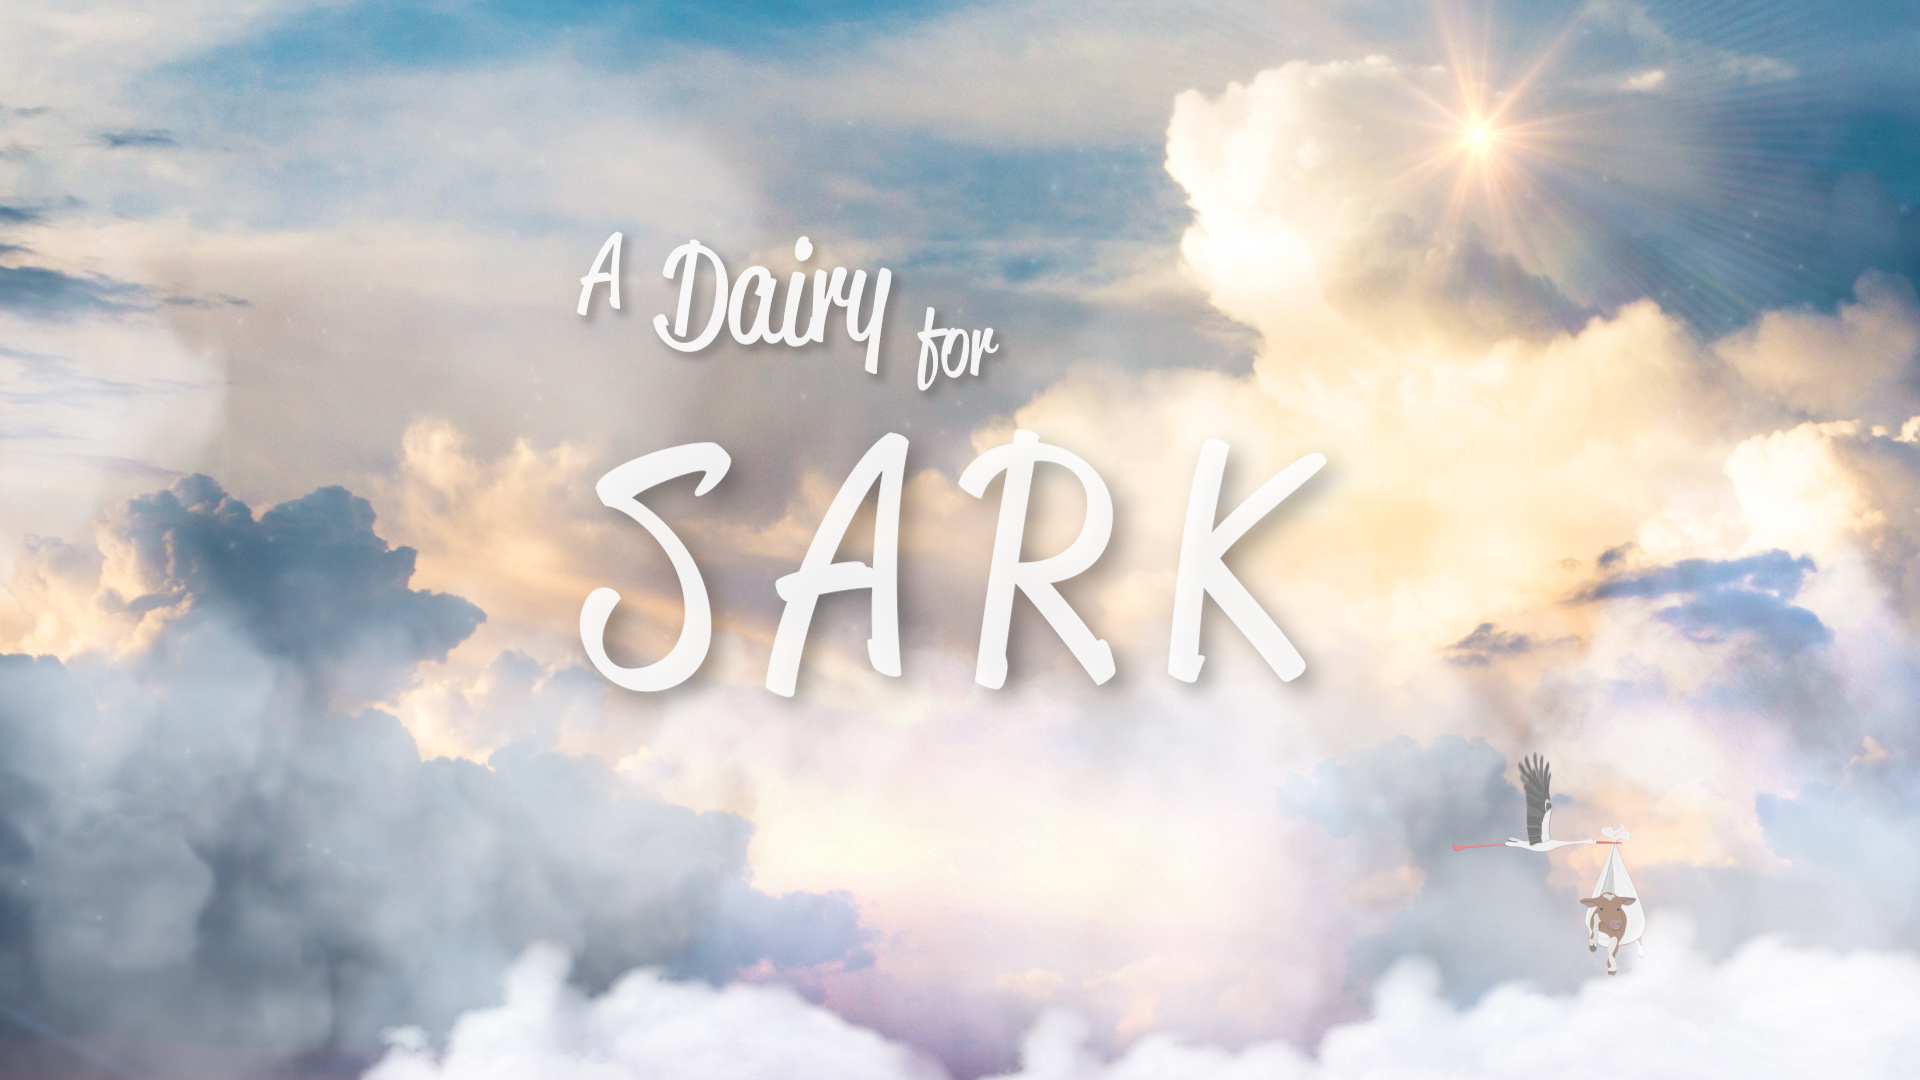 A Dairy for Sark: Crowdfunding Video